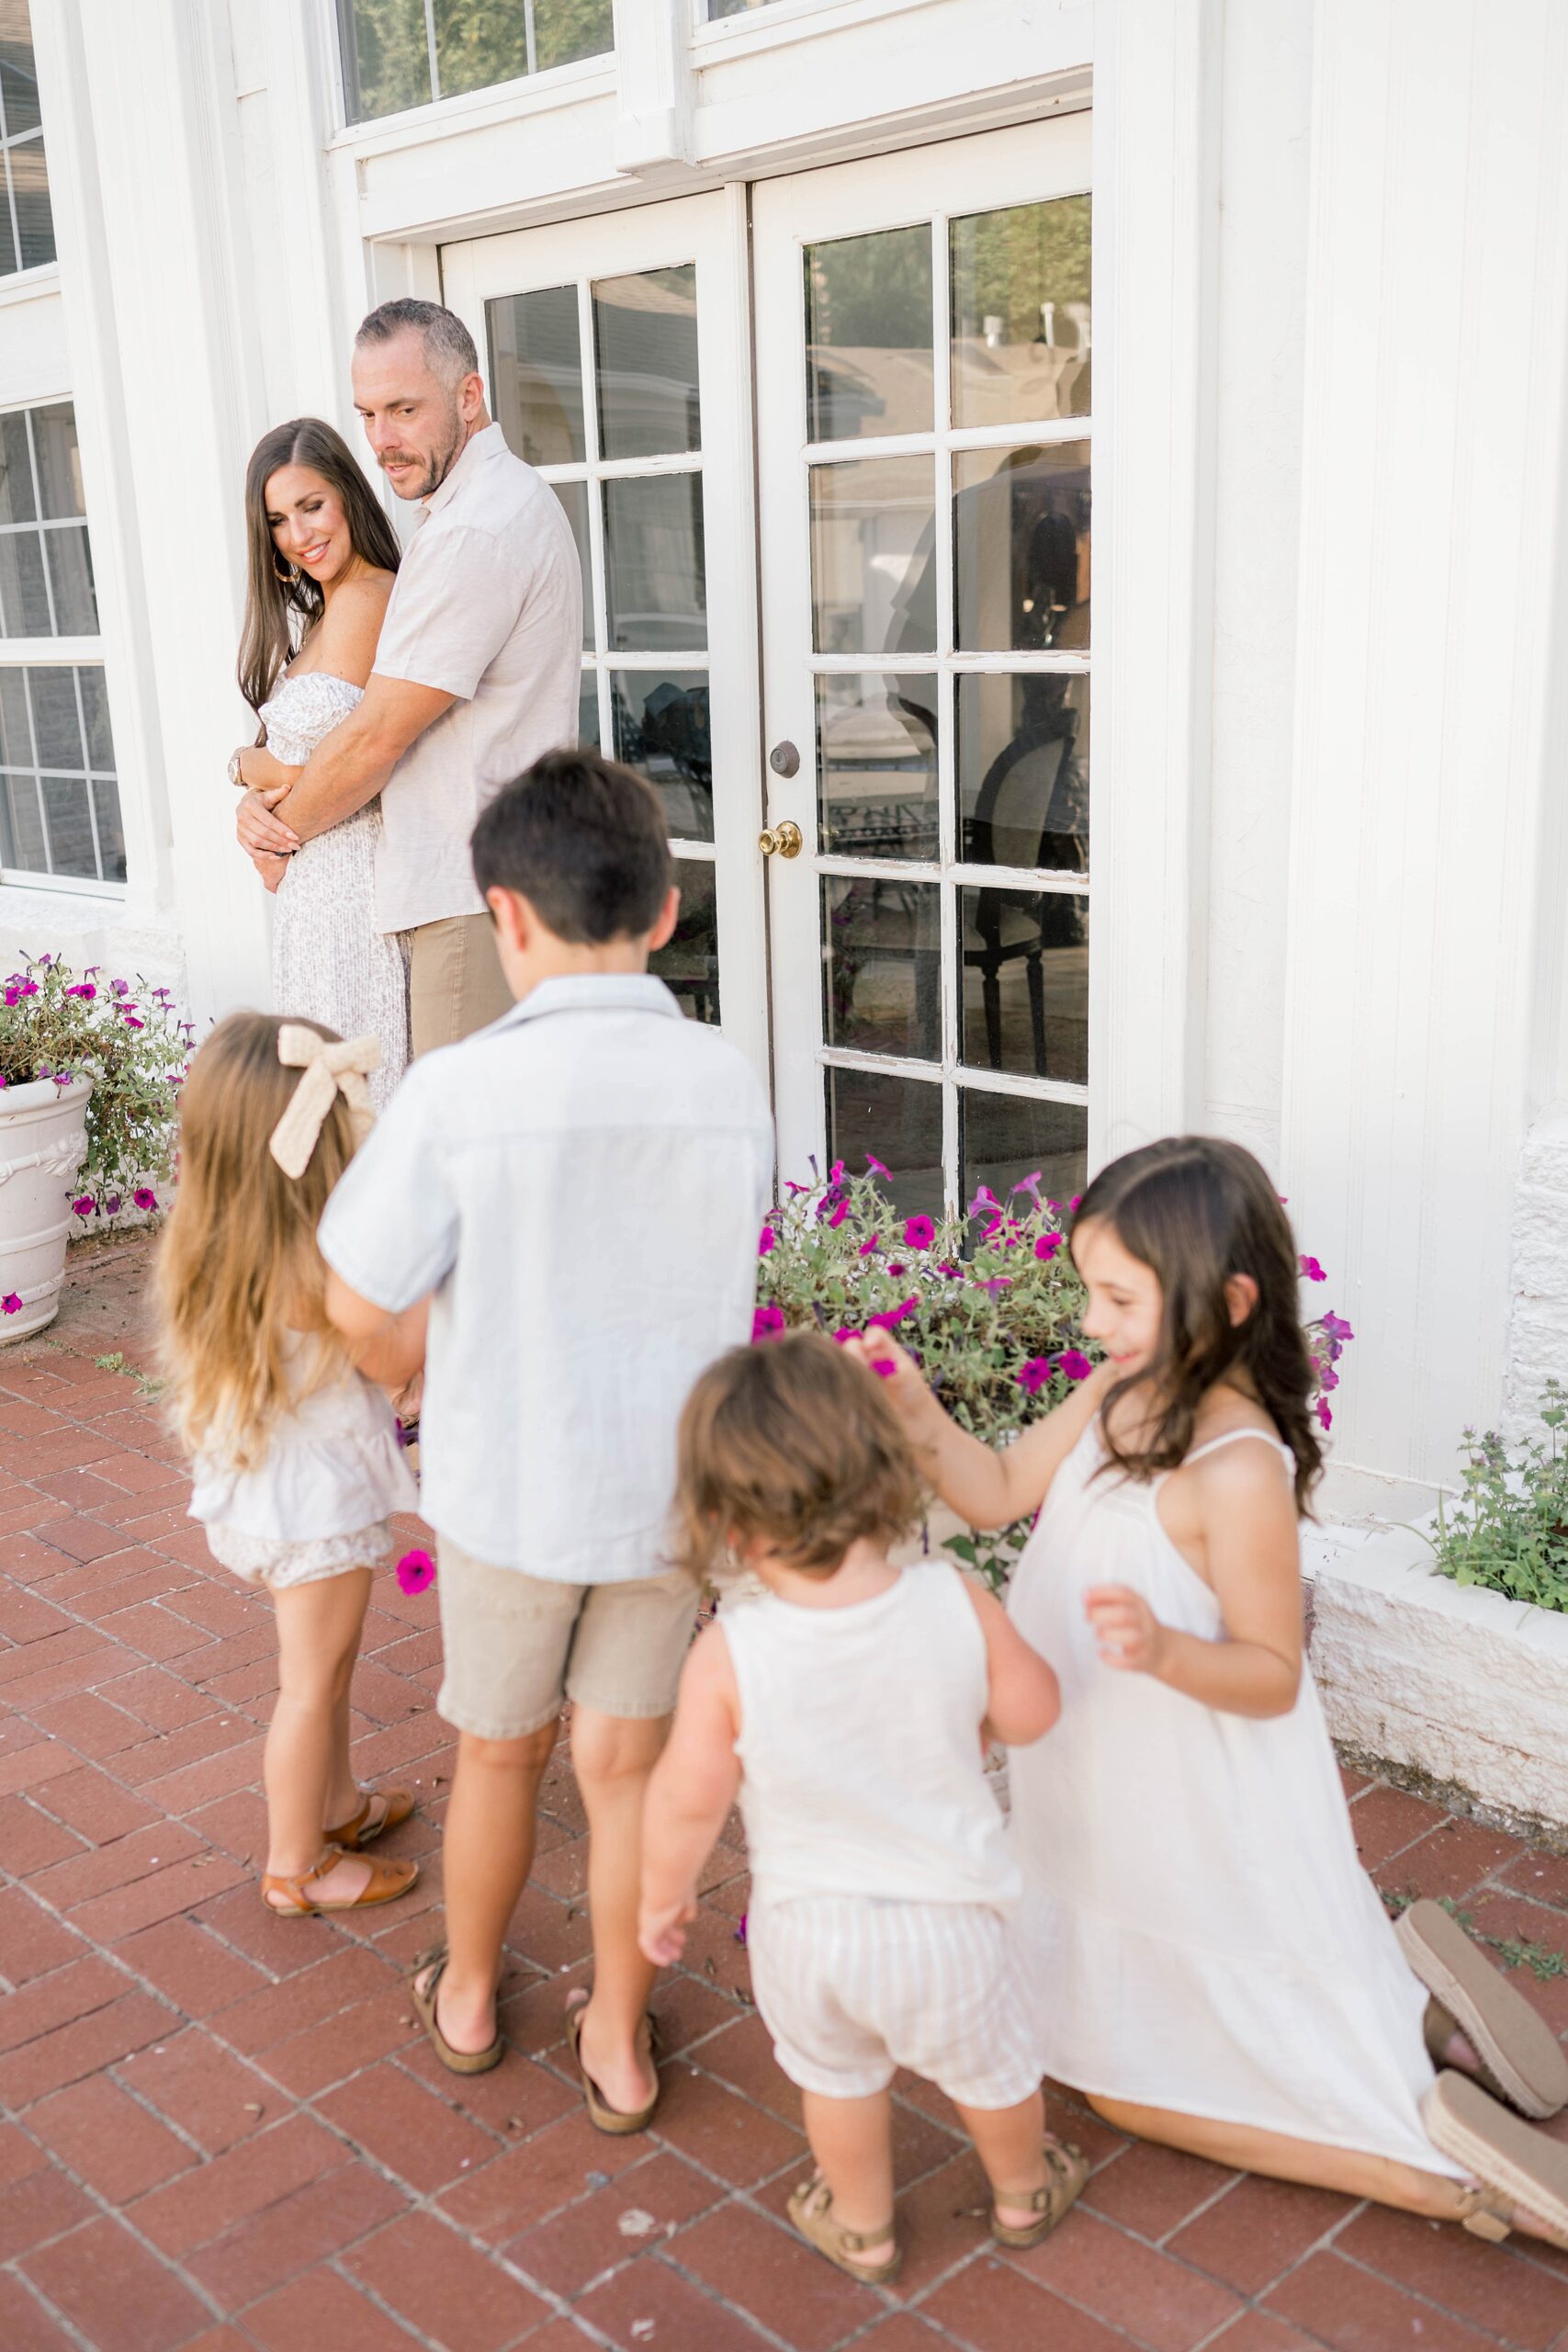 A mom and dad hug while their four young children play with flowers on a brick patio in white clothes before visiting kid friendly restaurants okc